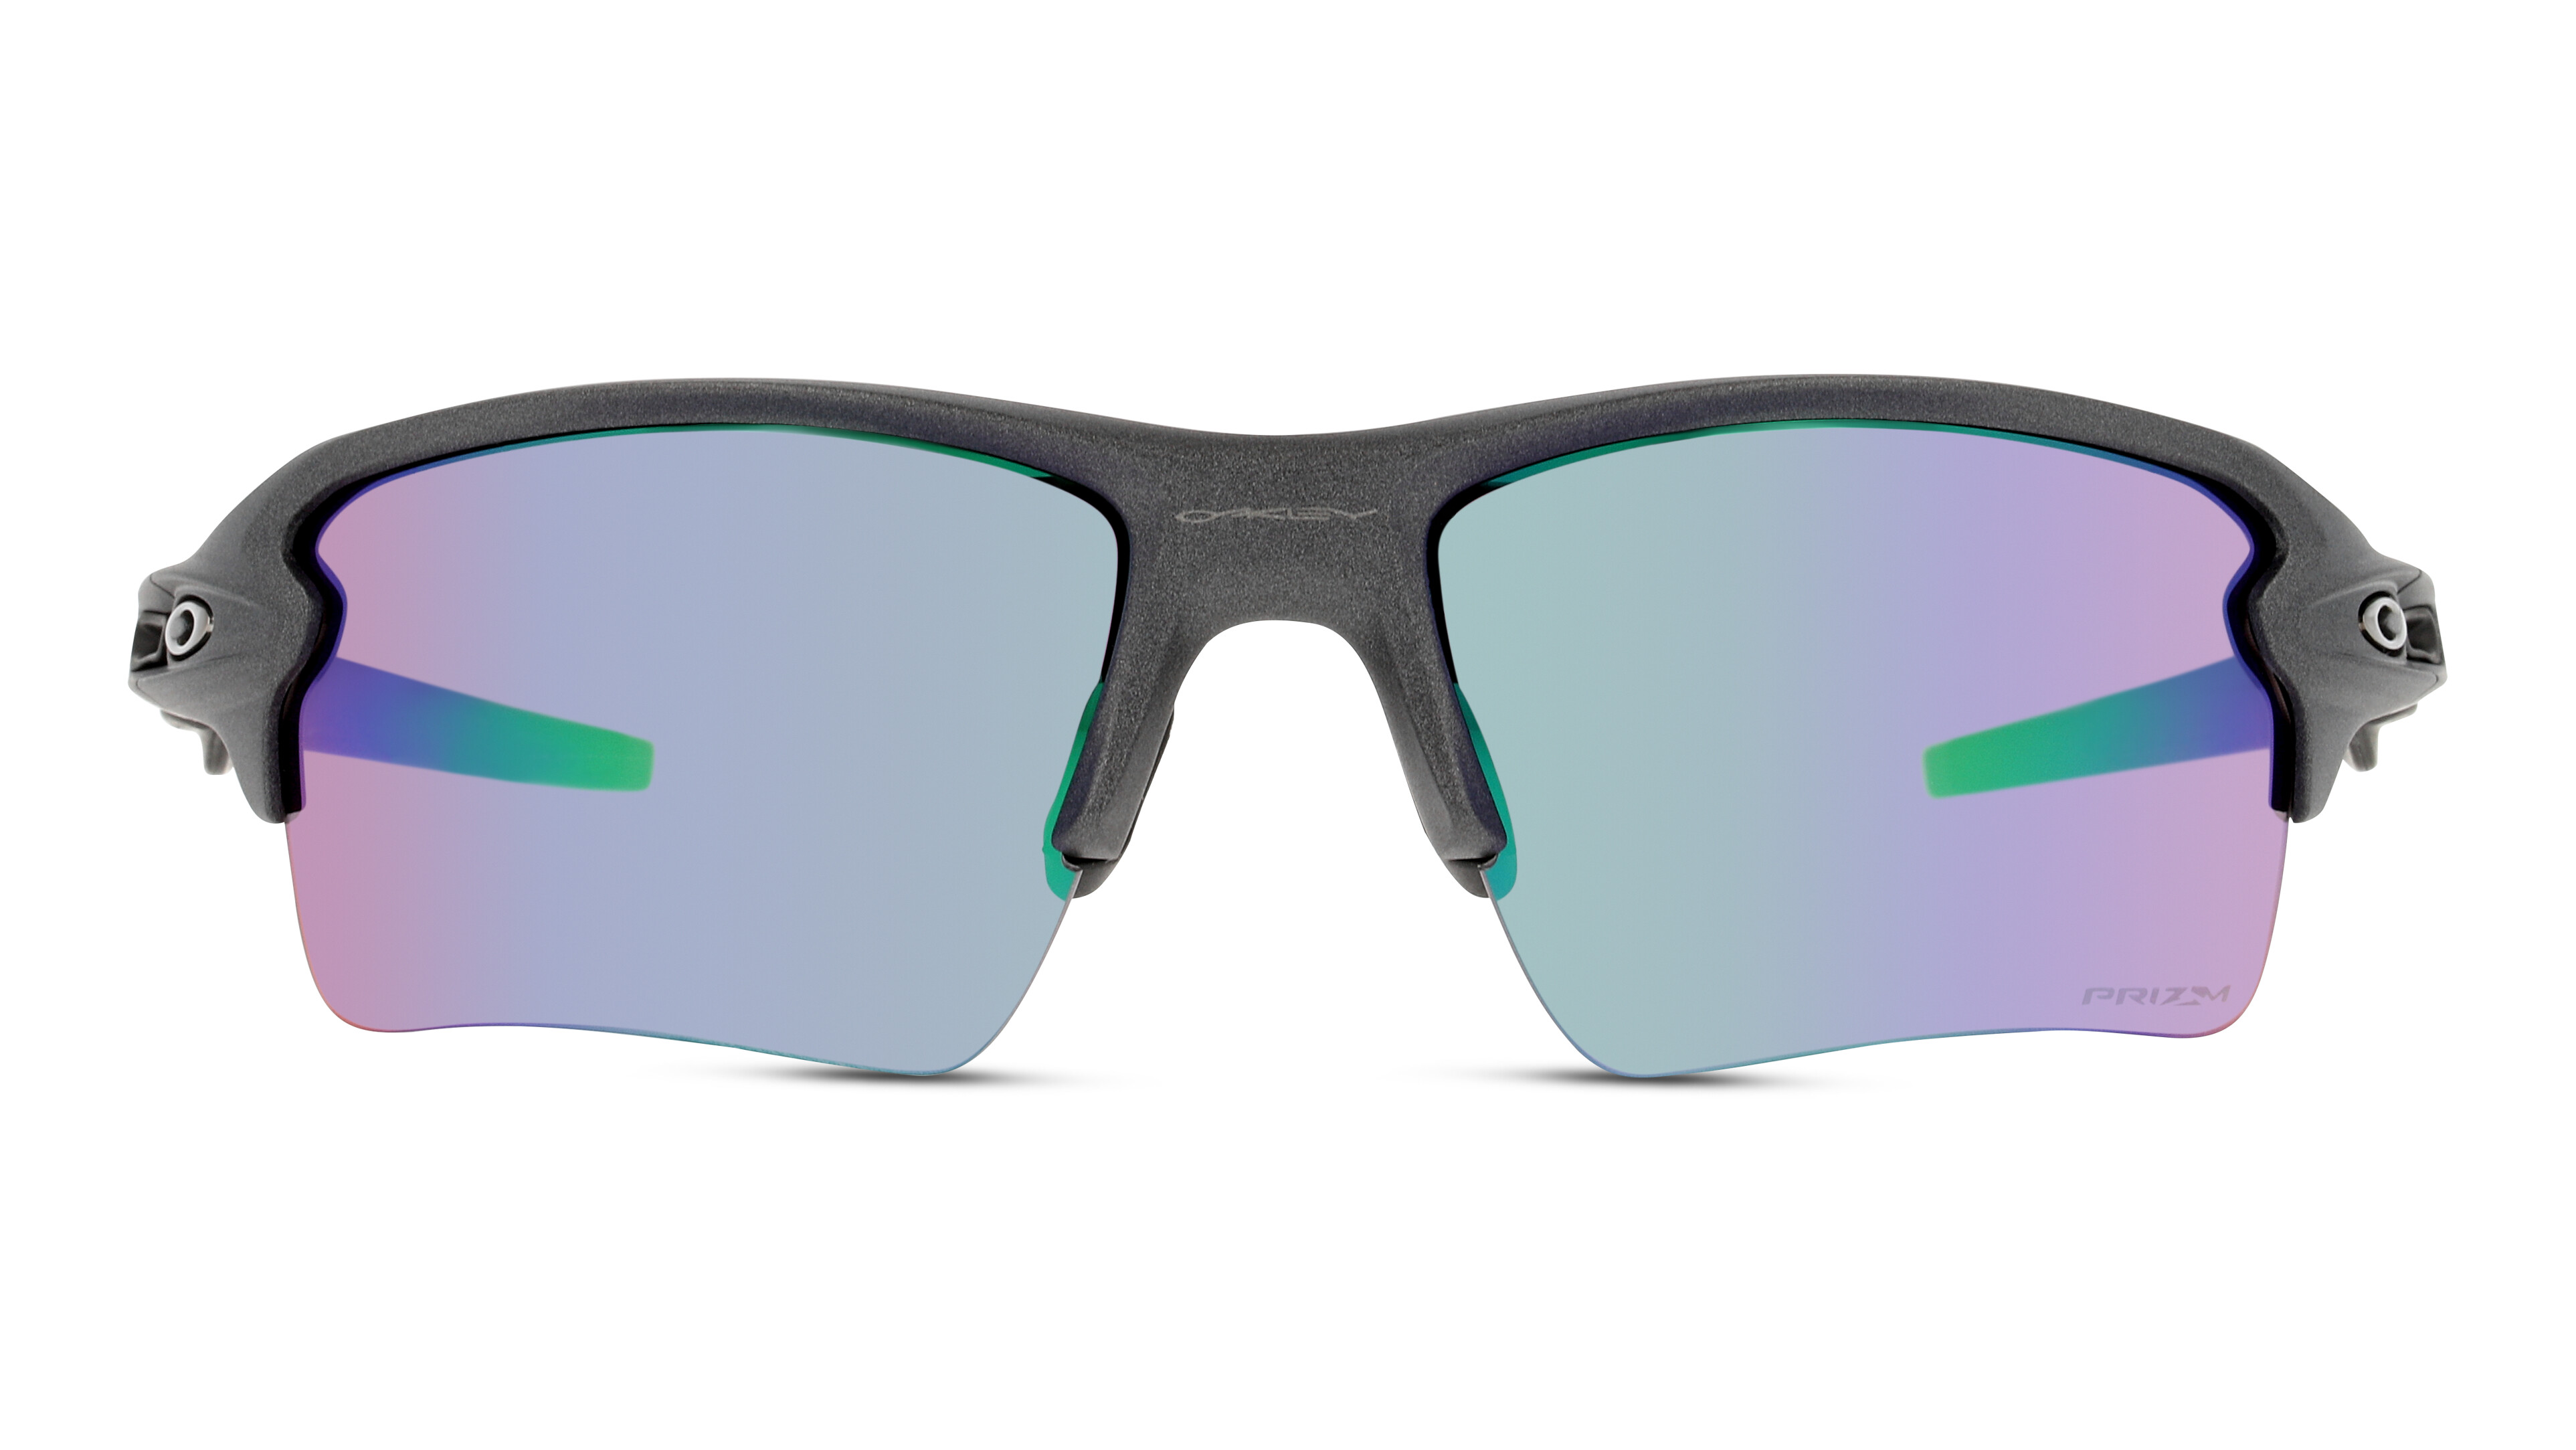 [products.image.front] Oakley FLAK 2.0 XL 0OO9188 9188F3 Sonnenbrille